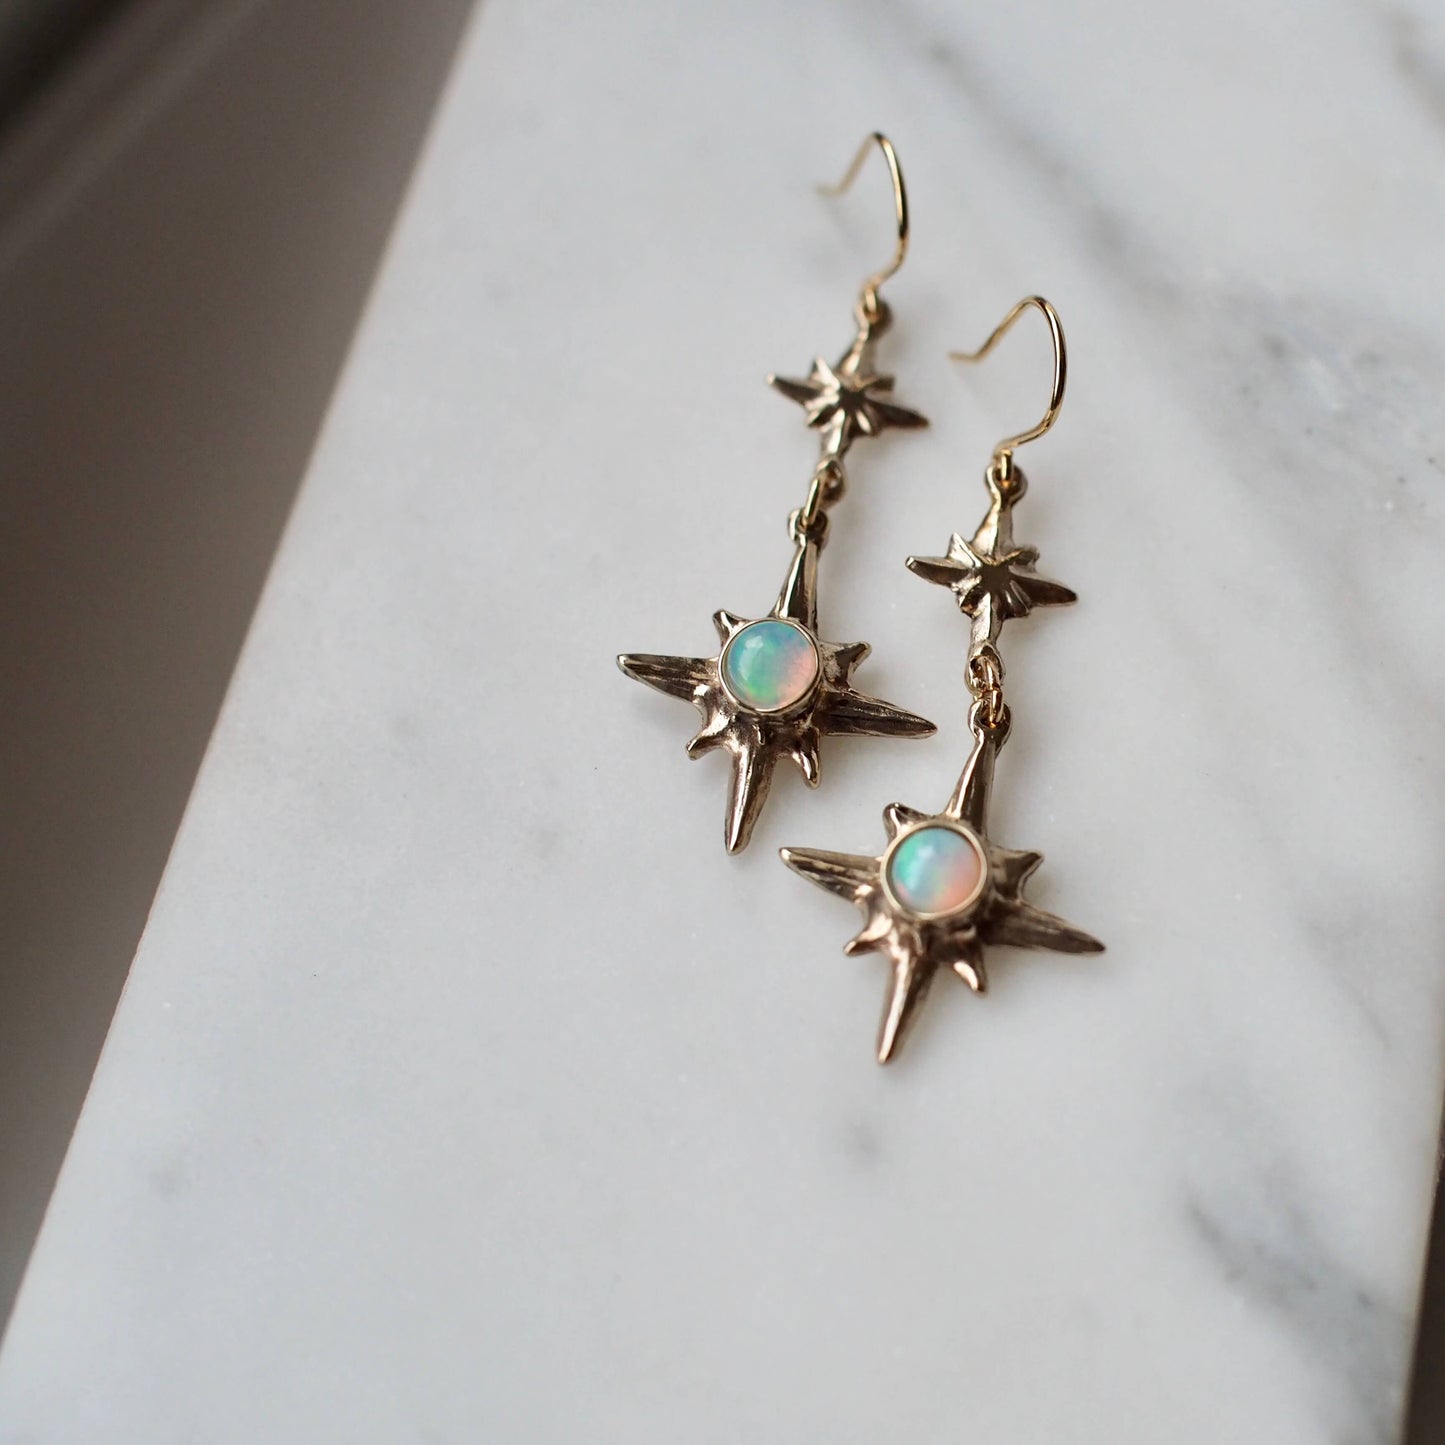 Polaris Star earrings set with sustainably sourced natural opal, artisan made jewelry by Iron Oxide Designs.